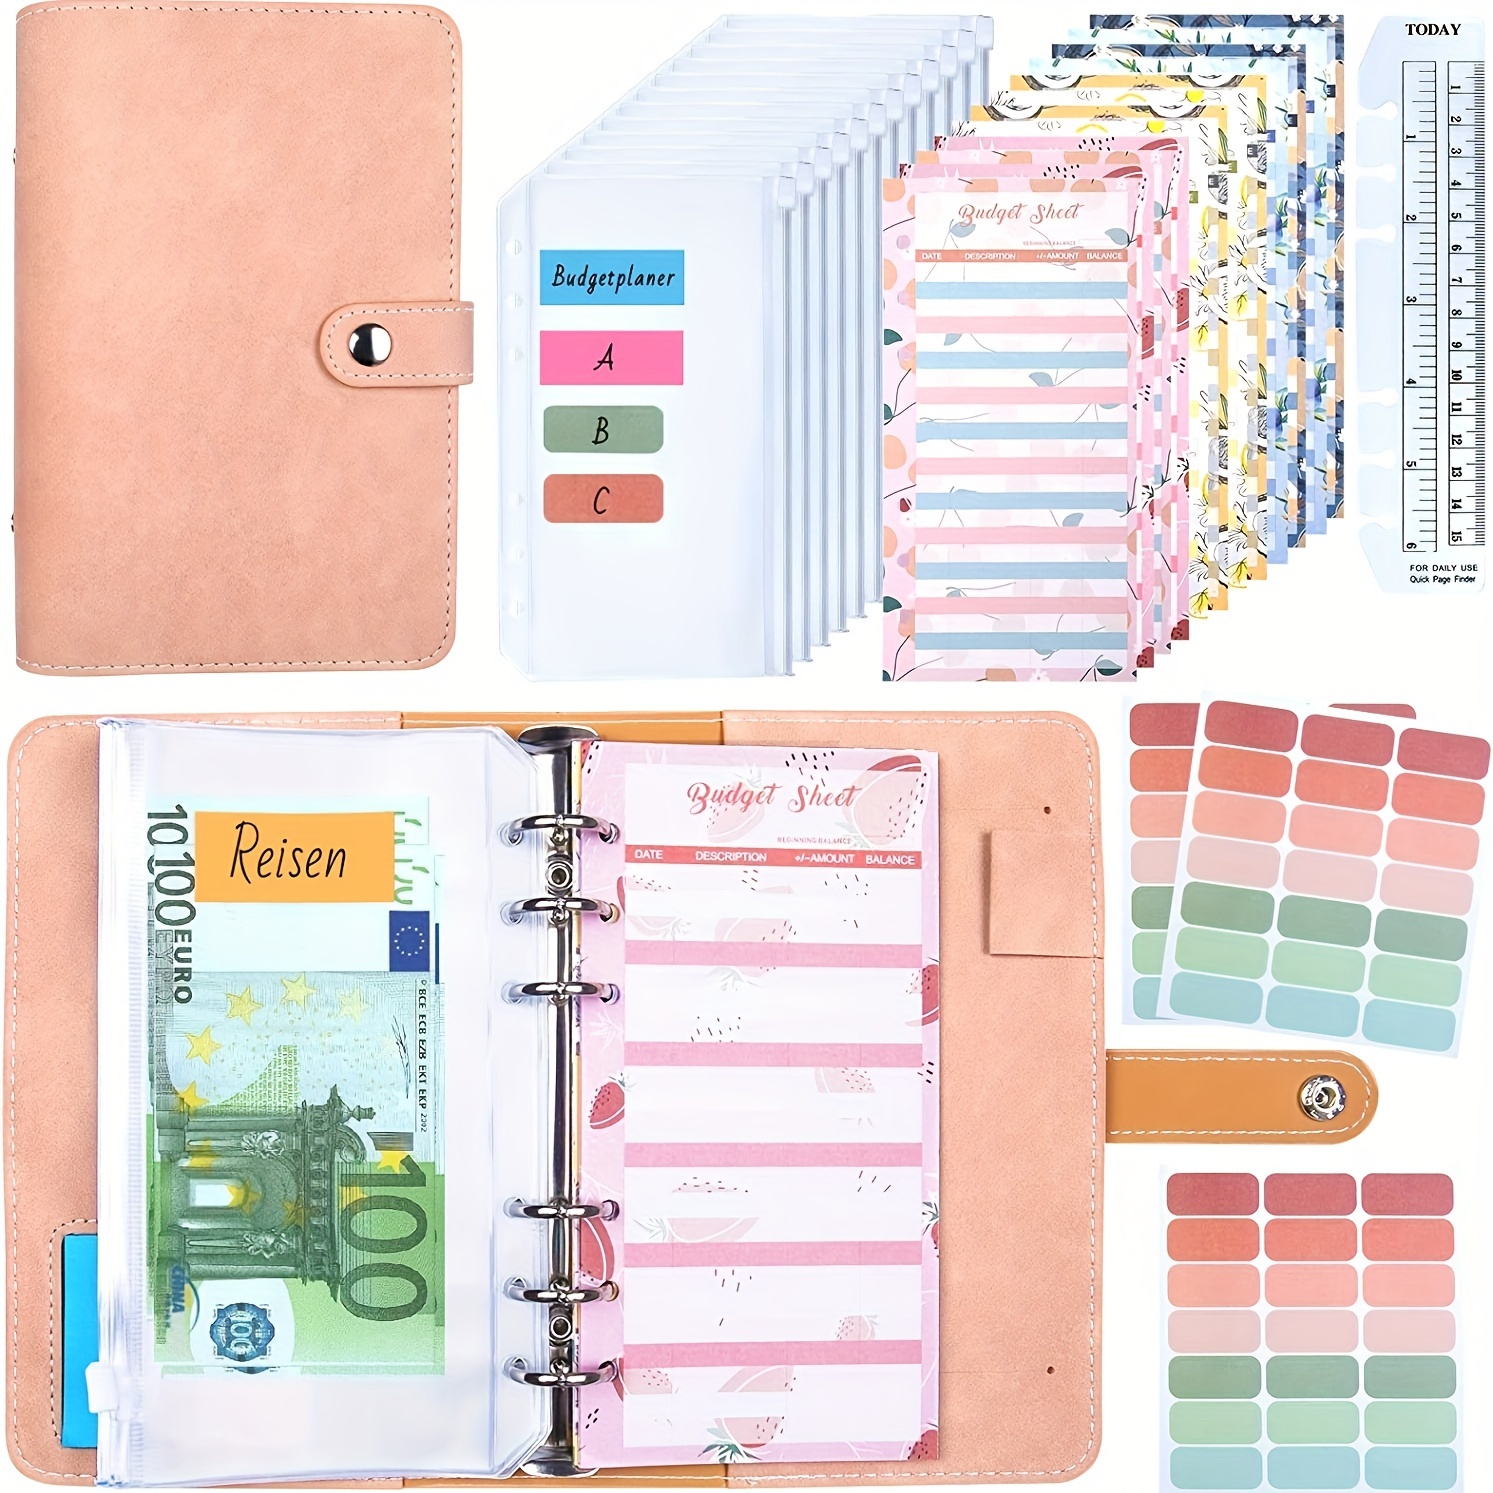 

A6 Budget Planner Suede Pink With Card Slots, Stainless Steel Binder, Pu Leather Cover, Pen Case, And Button Clasp - Financial Planning Organizer For Adults